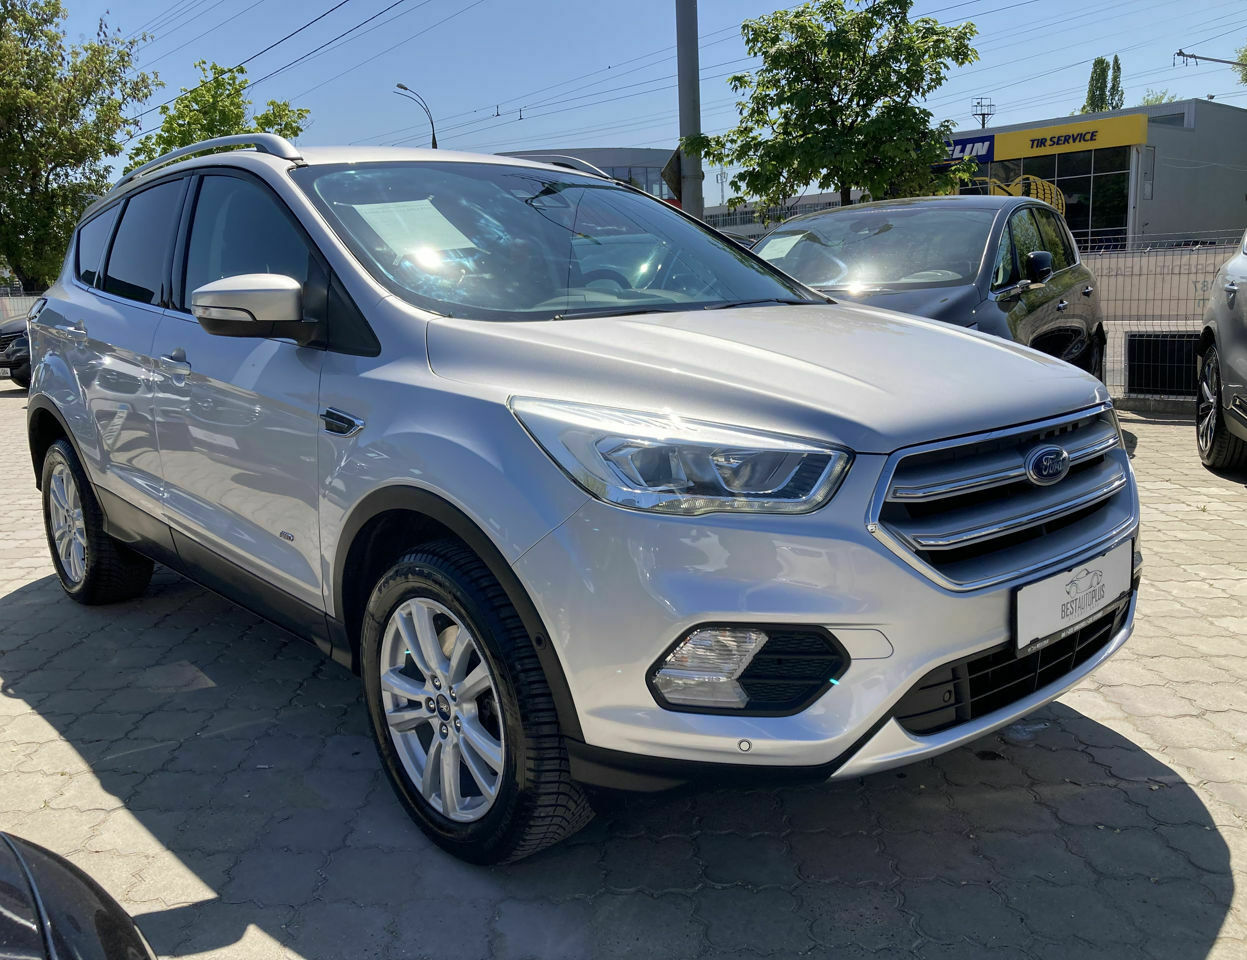 <span style="font-weight: 700;">Ford kuga&nbsp;</span>